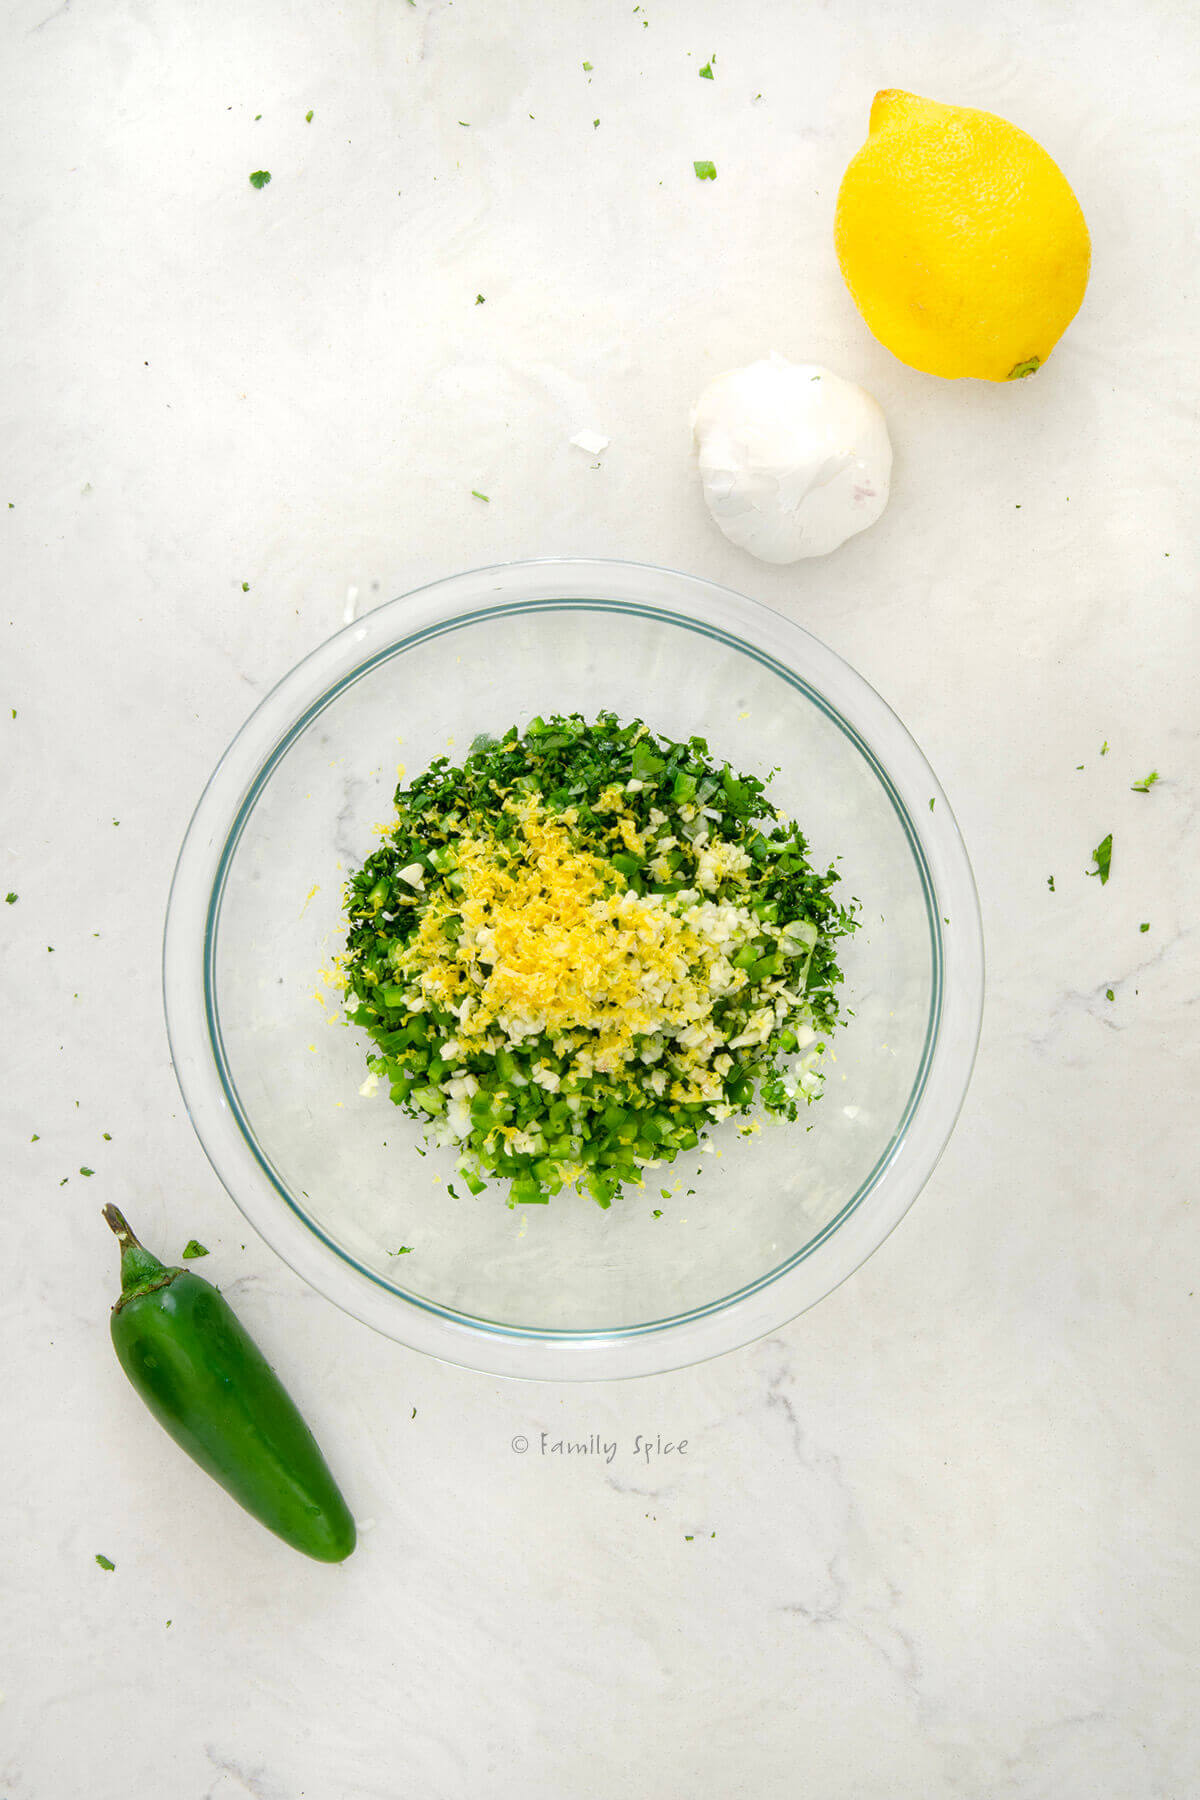 Top view of a small glass bowl with lemon zest added to the rest of the ingredients needed to make cilantro chimichurri with a lemon, jalapeño and garlic next to it